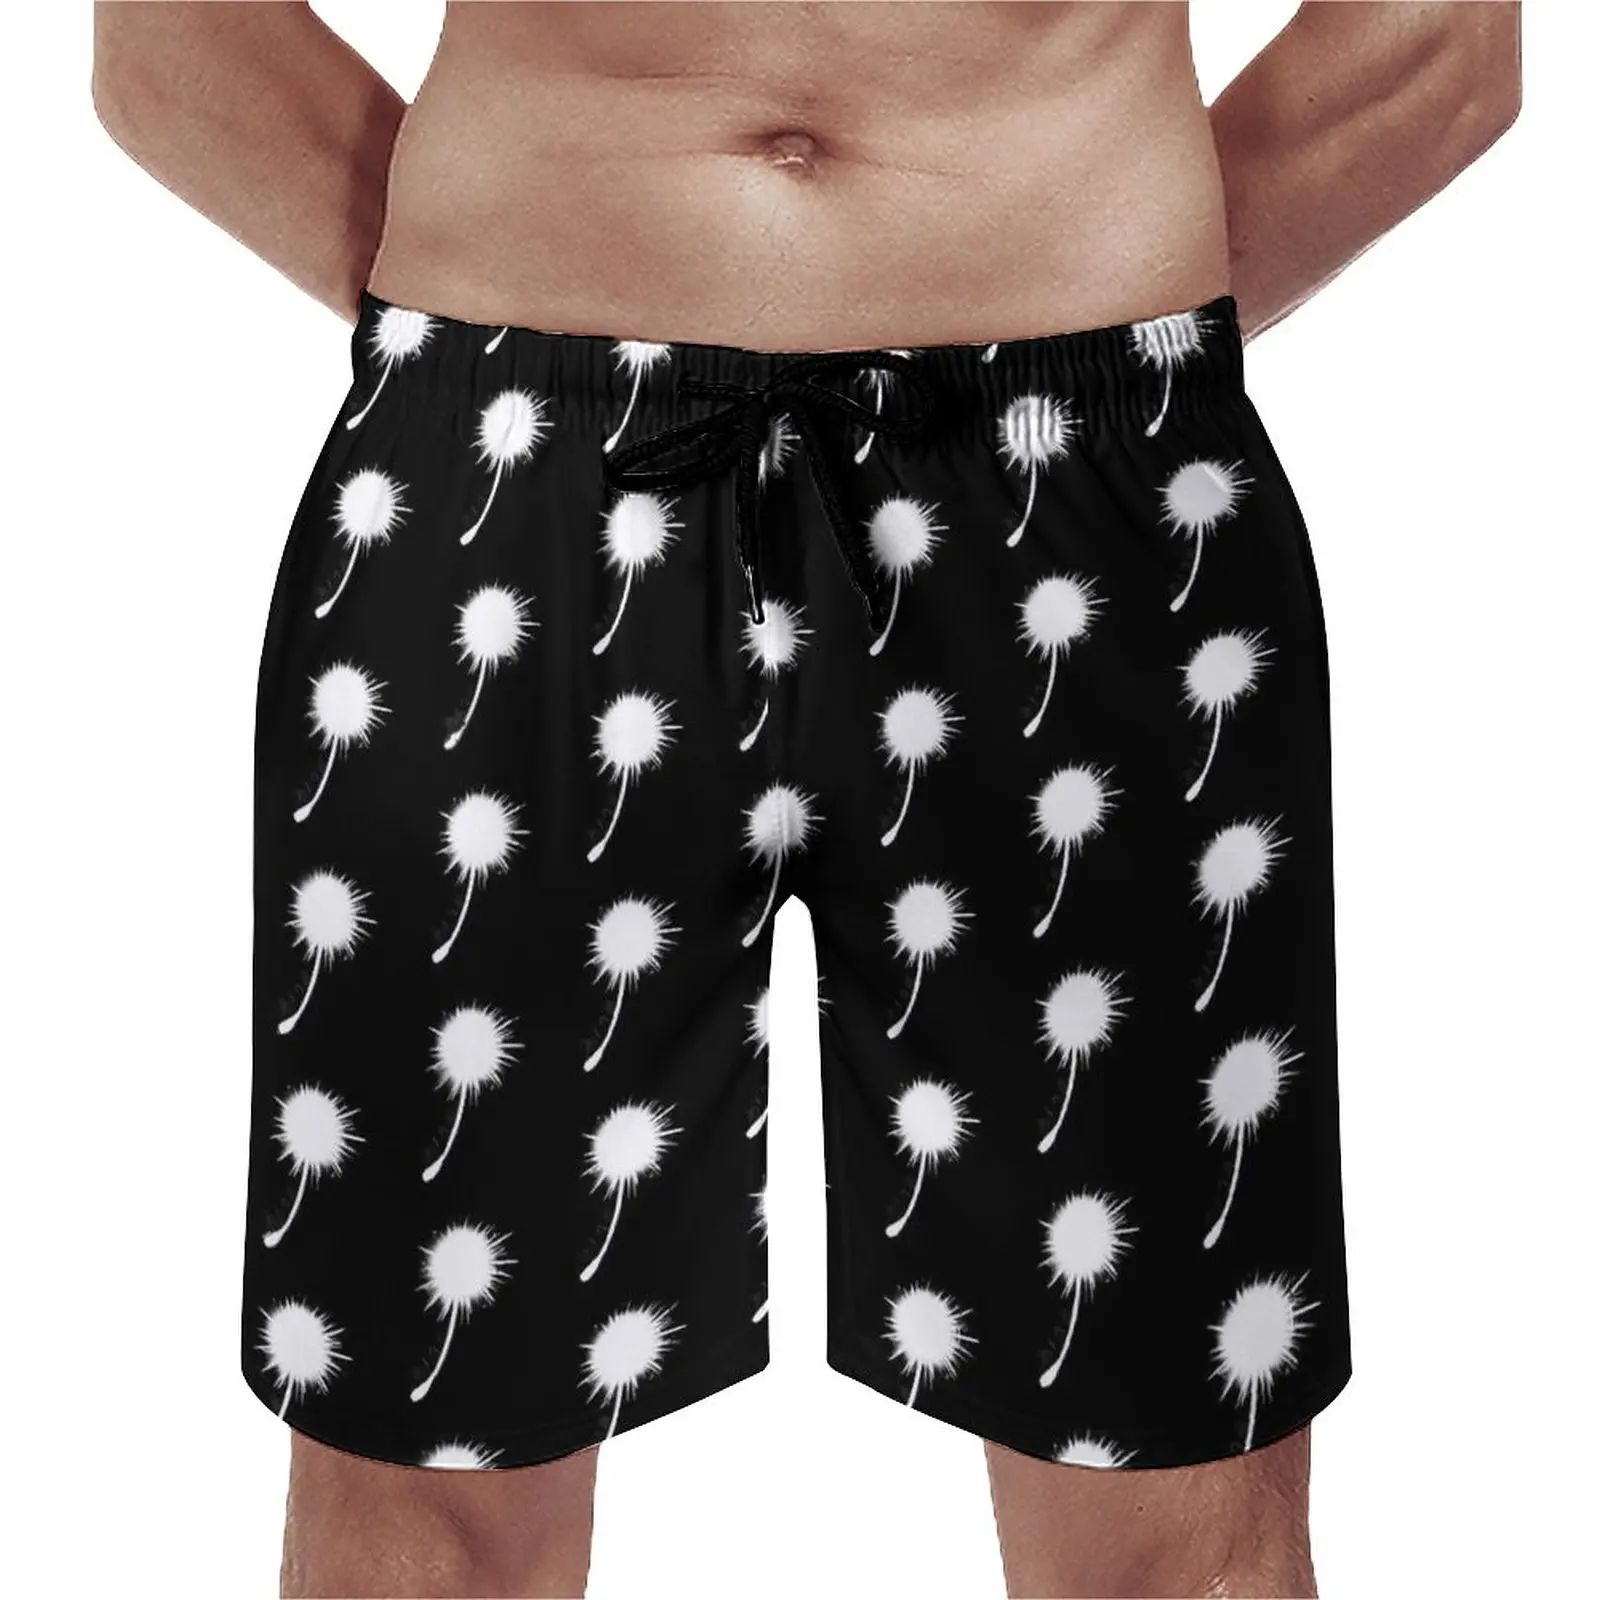 

Board Shorts Dandelion Wish Casual Swimming Trunks Black White Males Comfortable Surfing Quality Large Size Beach Short Pants